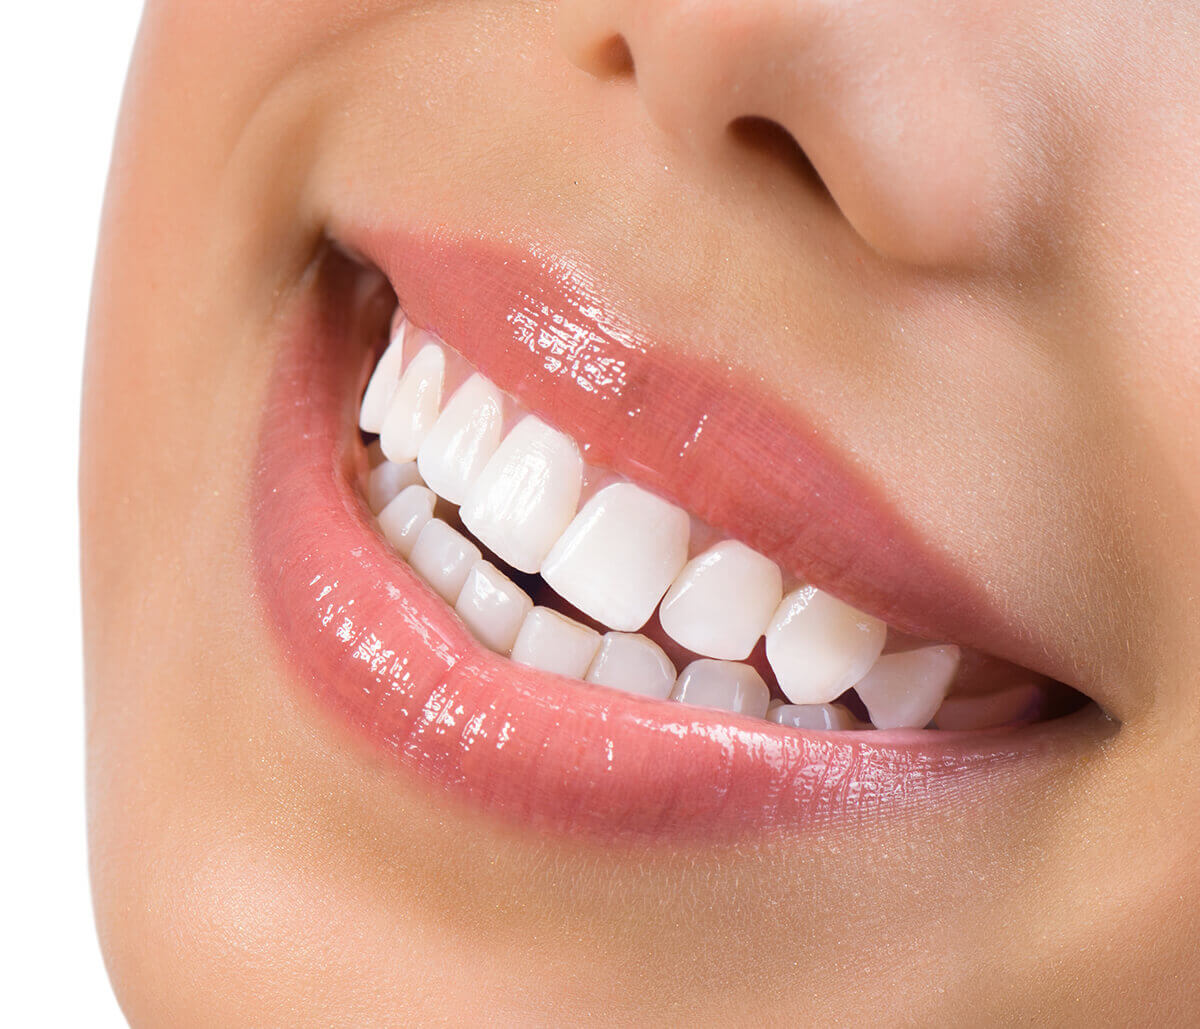 Enhance your smile with Professional Teeth Whitening